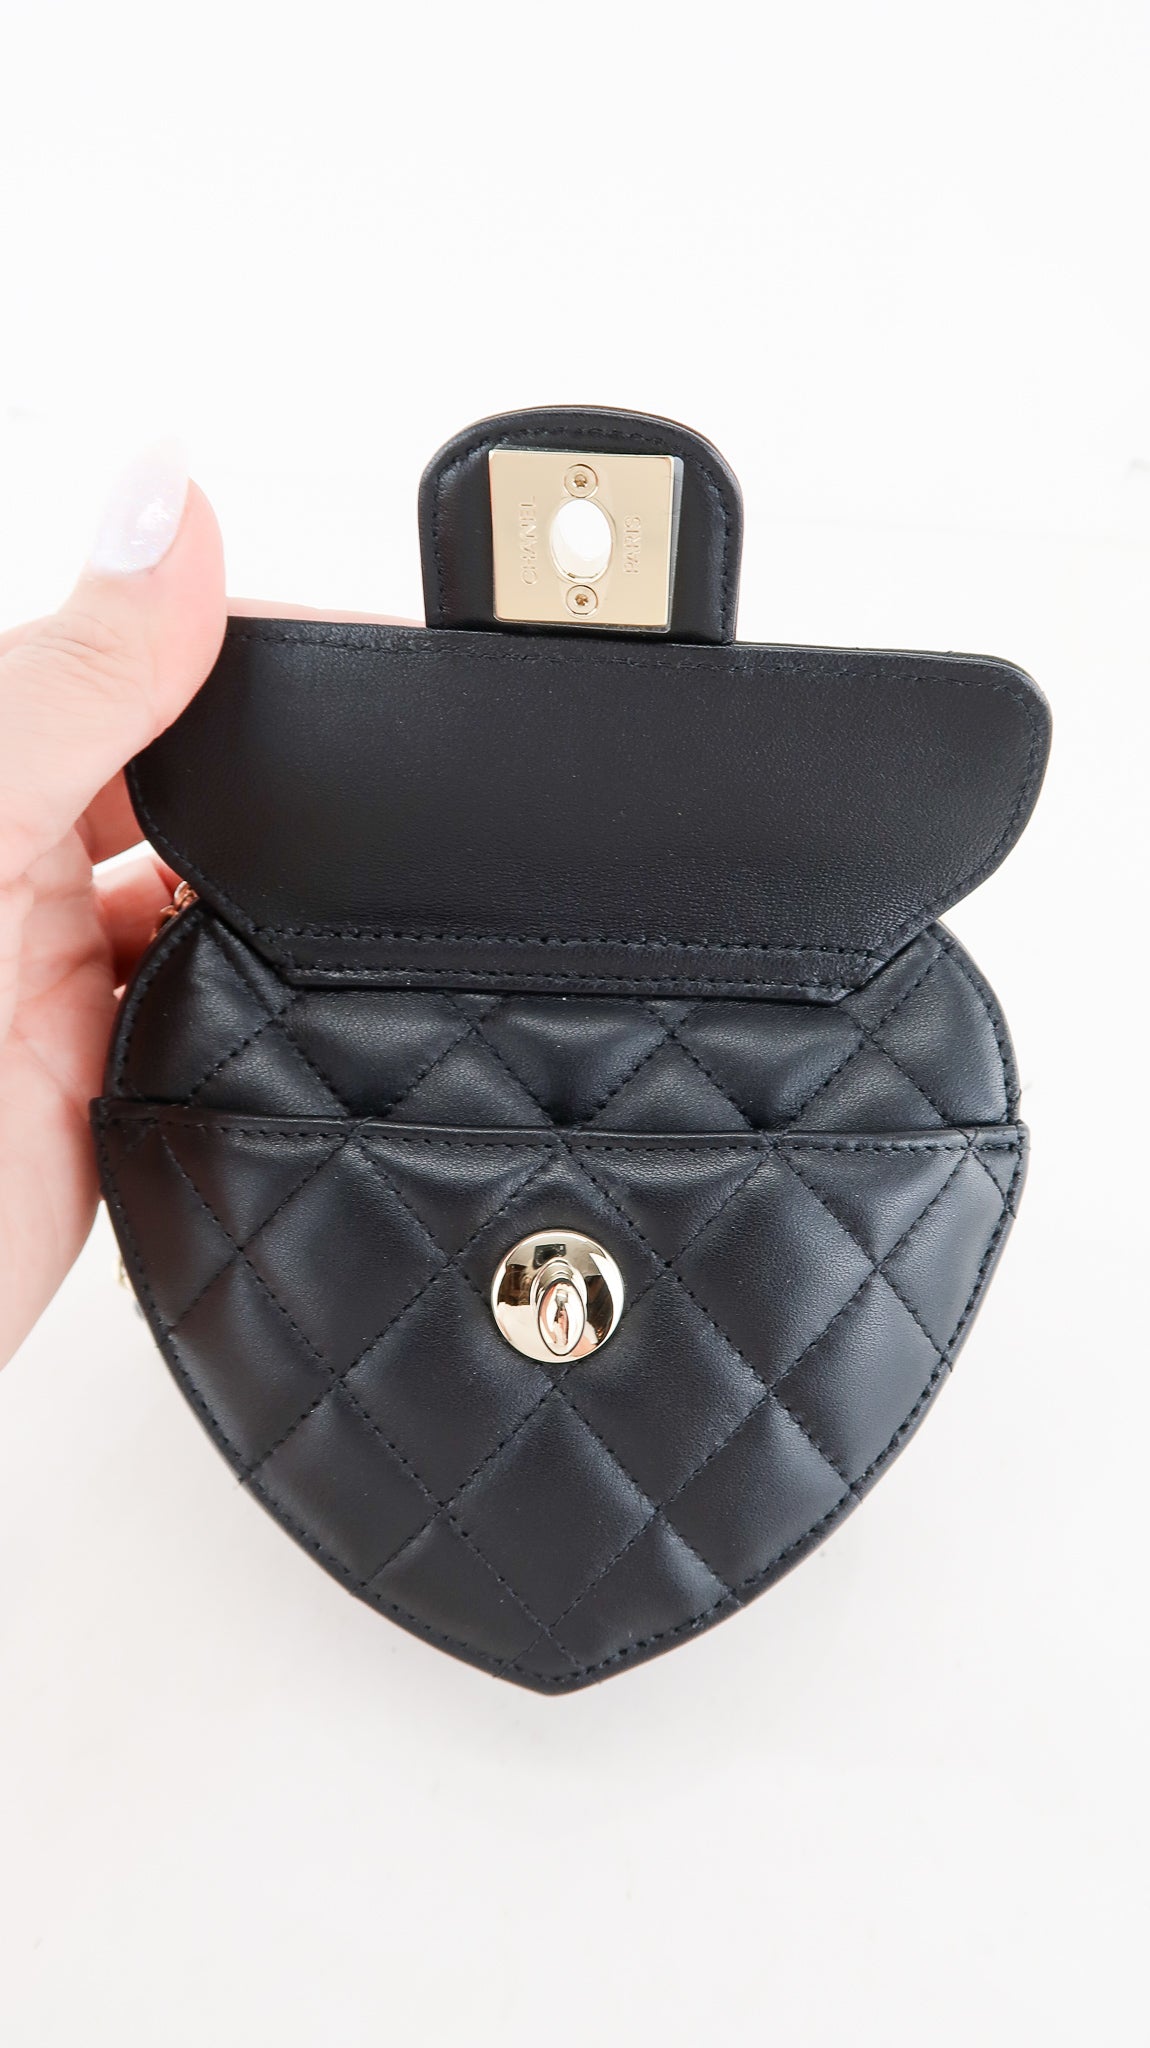 Chanel Black Quilted Lambskin Heart Zipped Arm Coin Purse